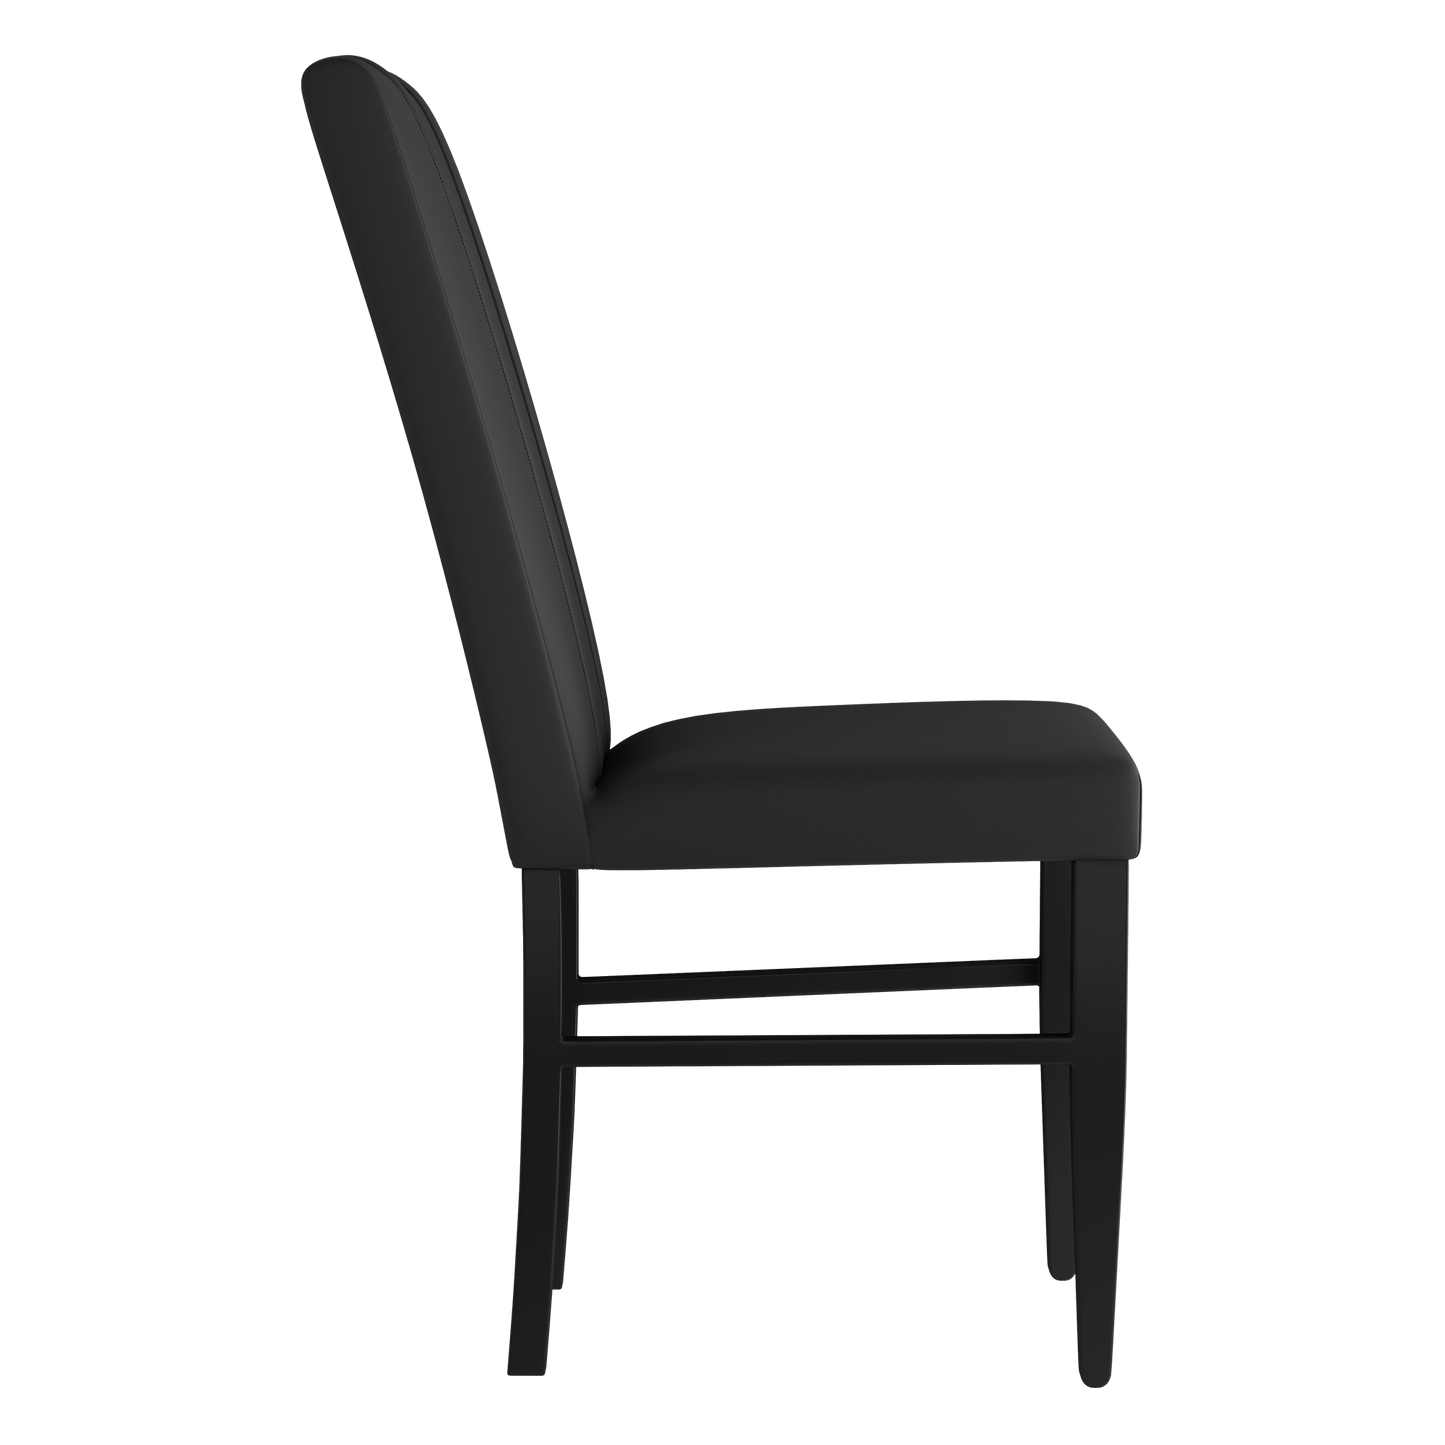 Side Chair 2000 with Montreal Canadiens Logo Set of 2